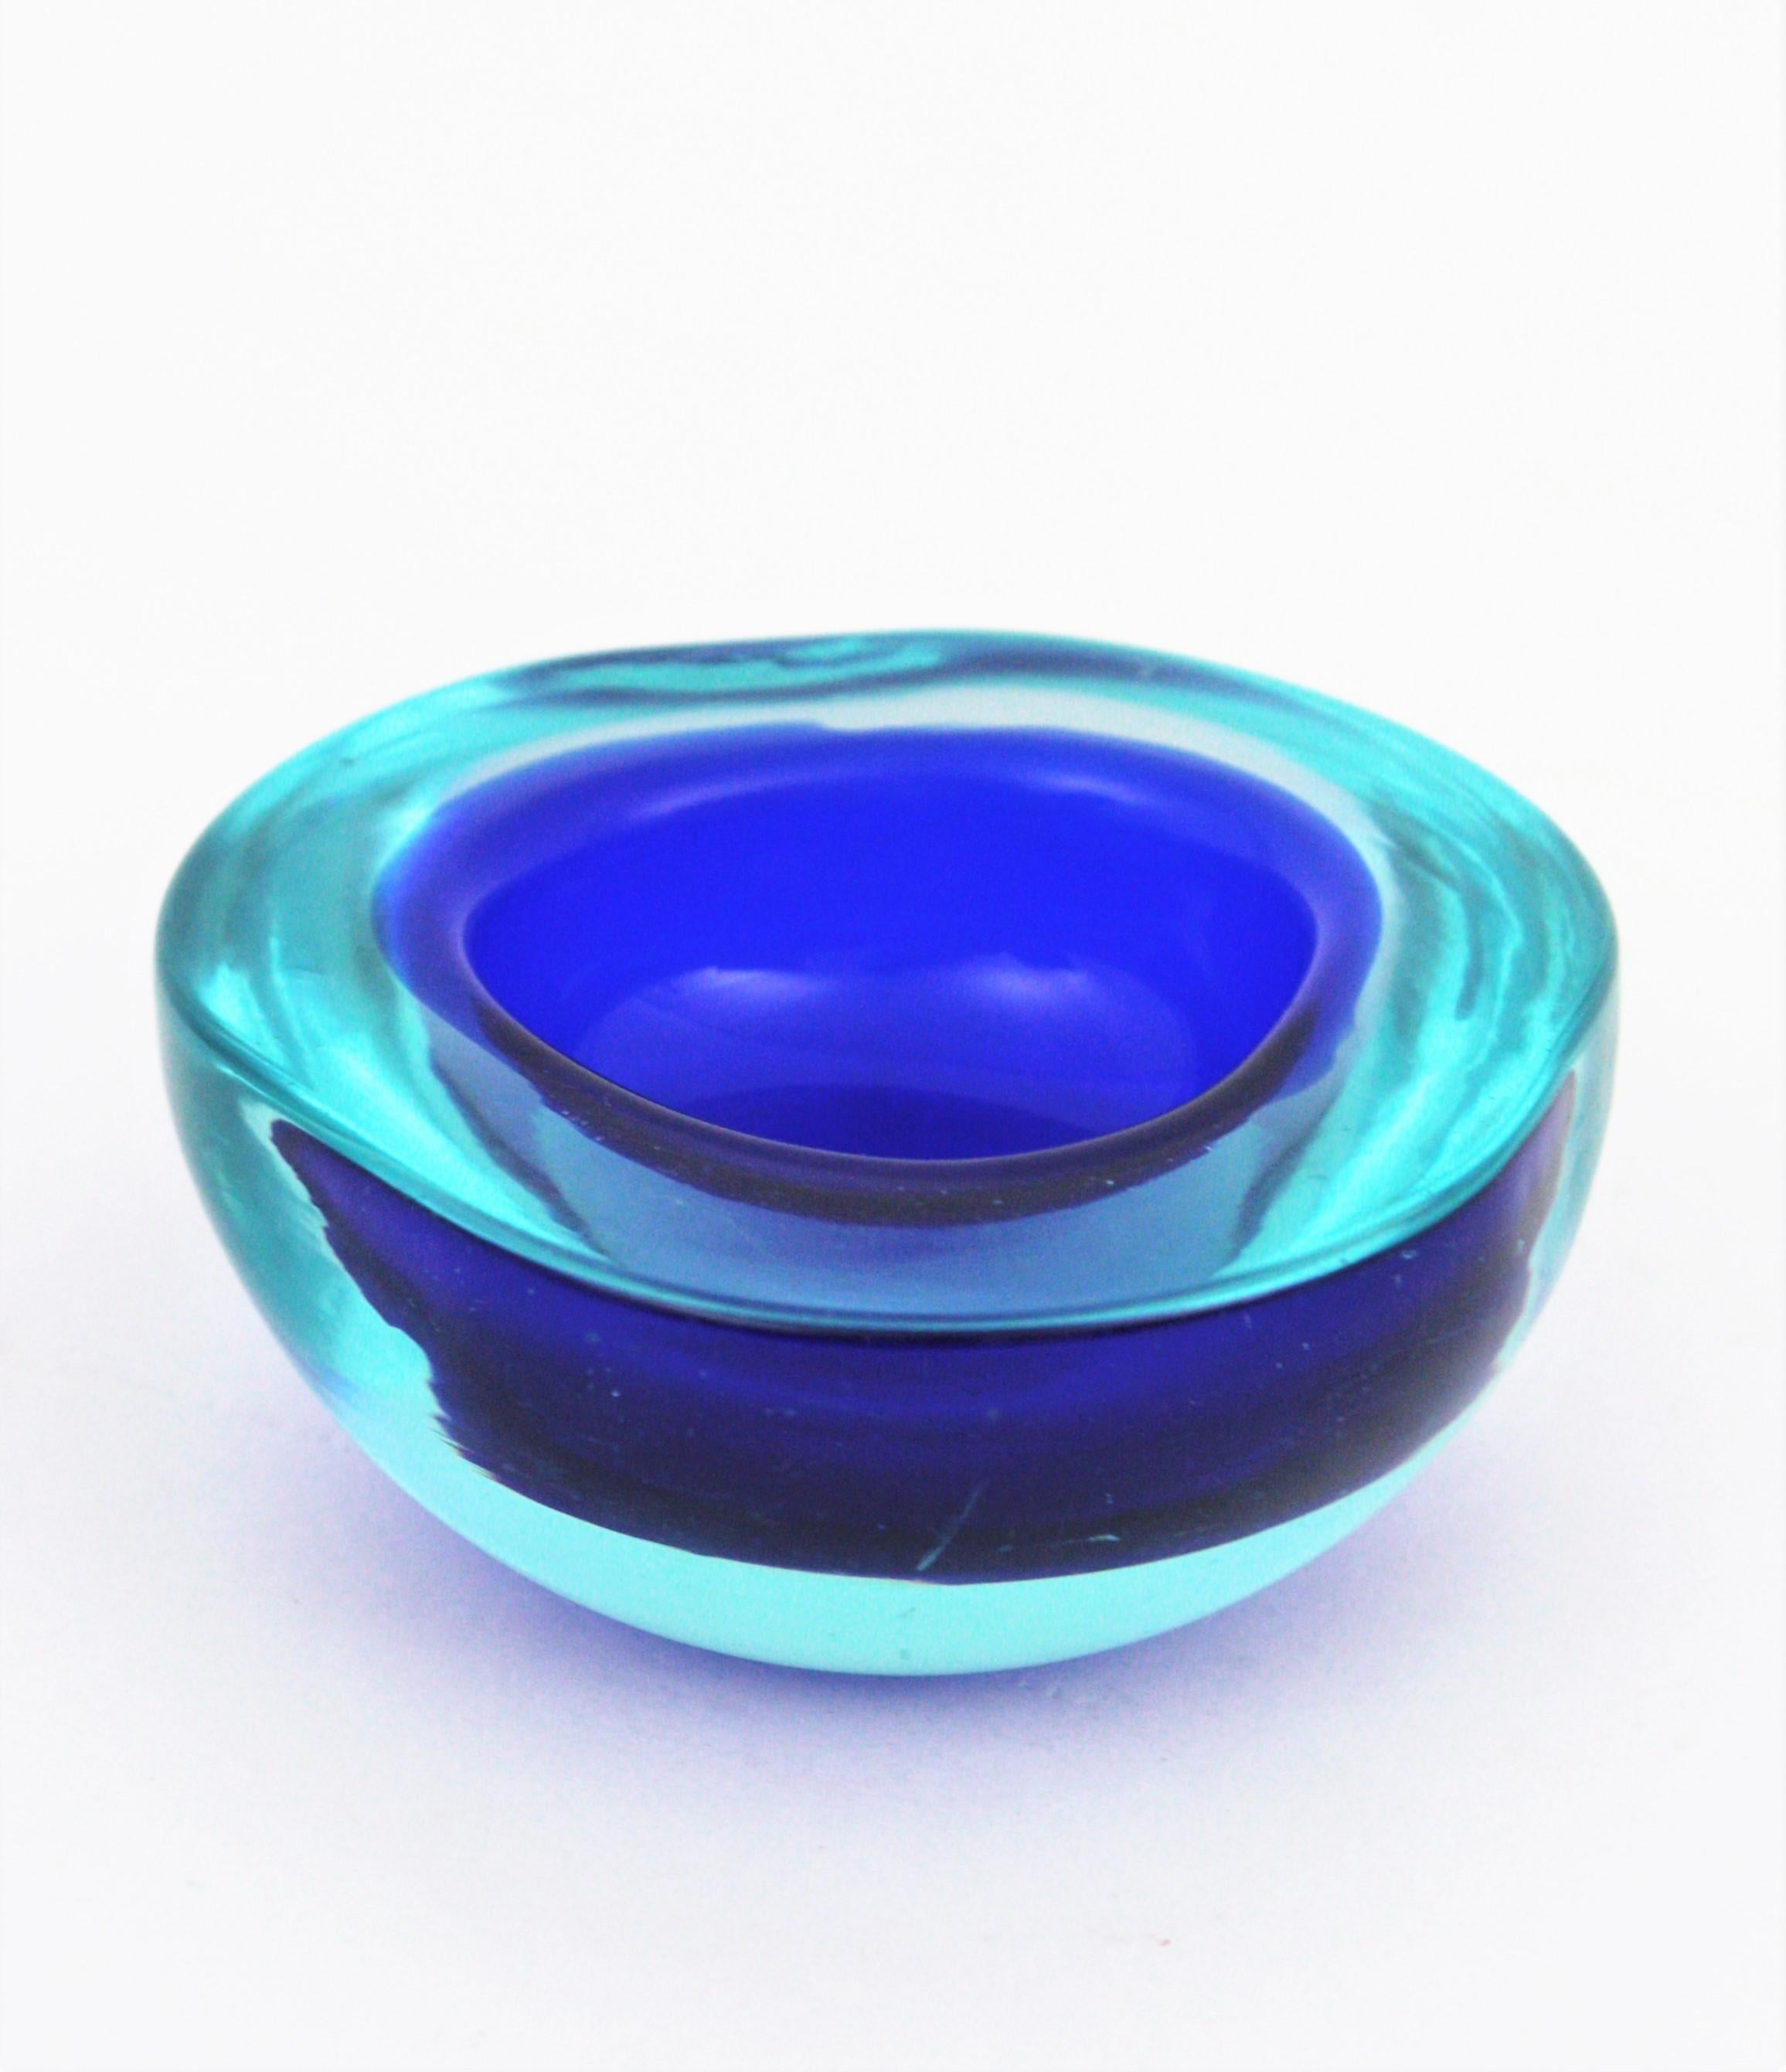 Archimede Seguso Murano Small Sommerso Blue Glass Geode Bowl, 1960s For Sale 6